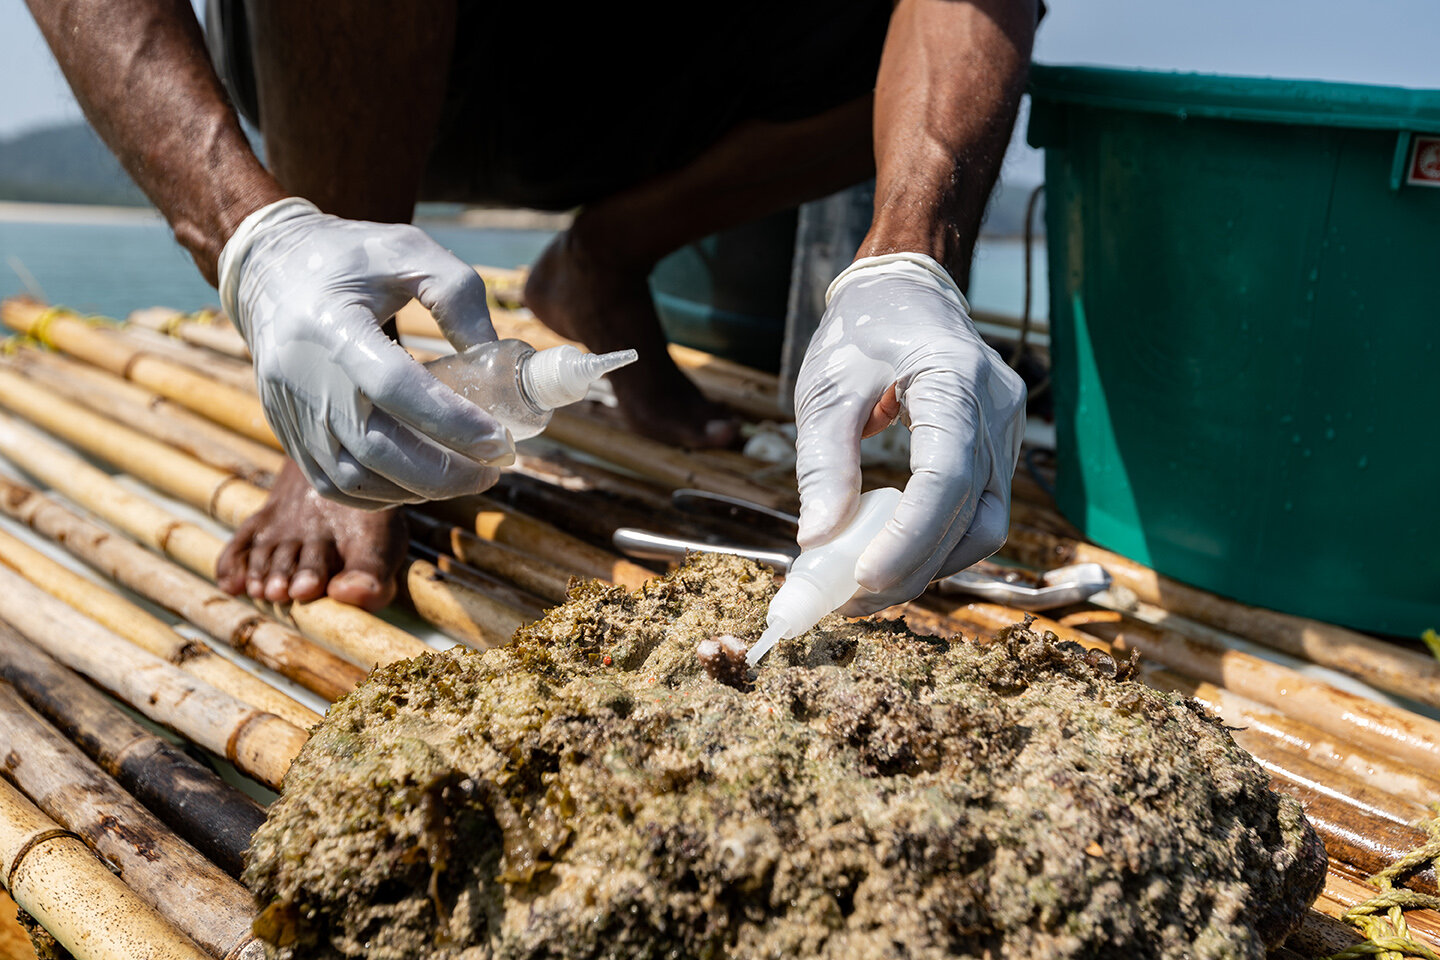  Feb 02, 2020 - Kyun Pila, Myanmar. Anuar Abdullah places a piece of coral on substrate during the coral propagation process. © Nicolas Axelrod / Ruom 